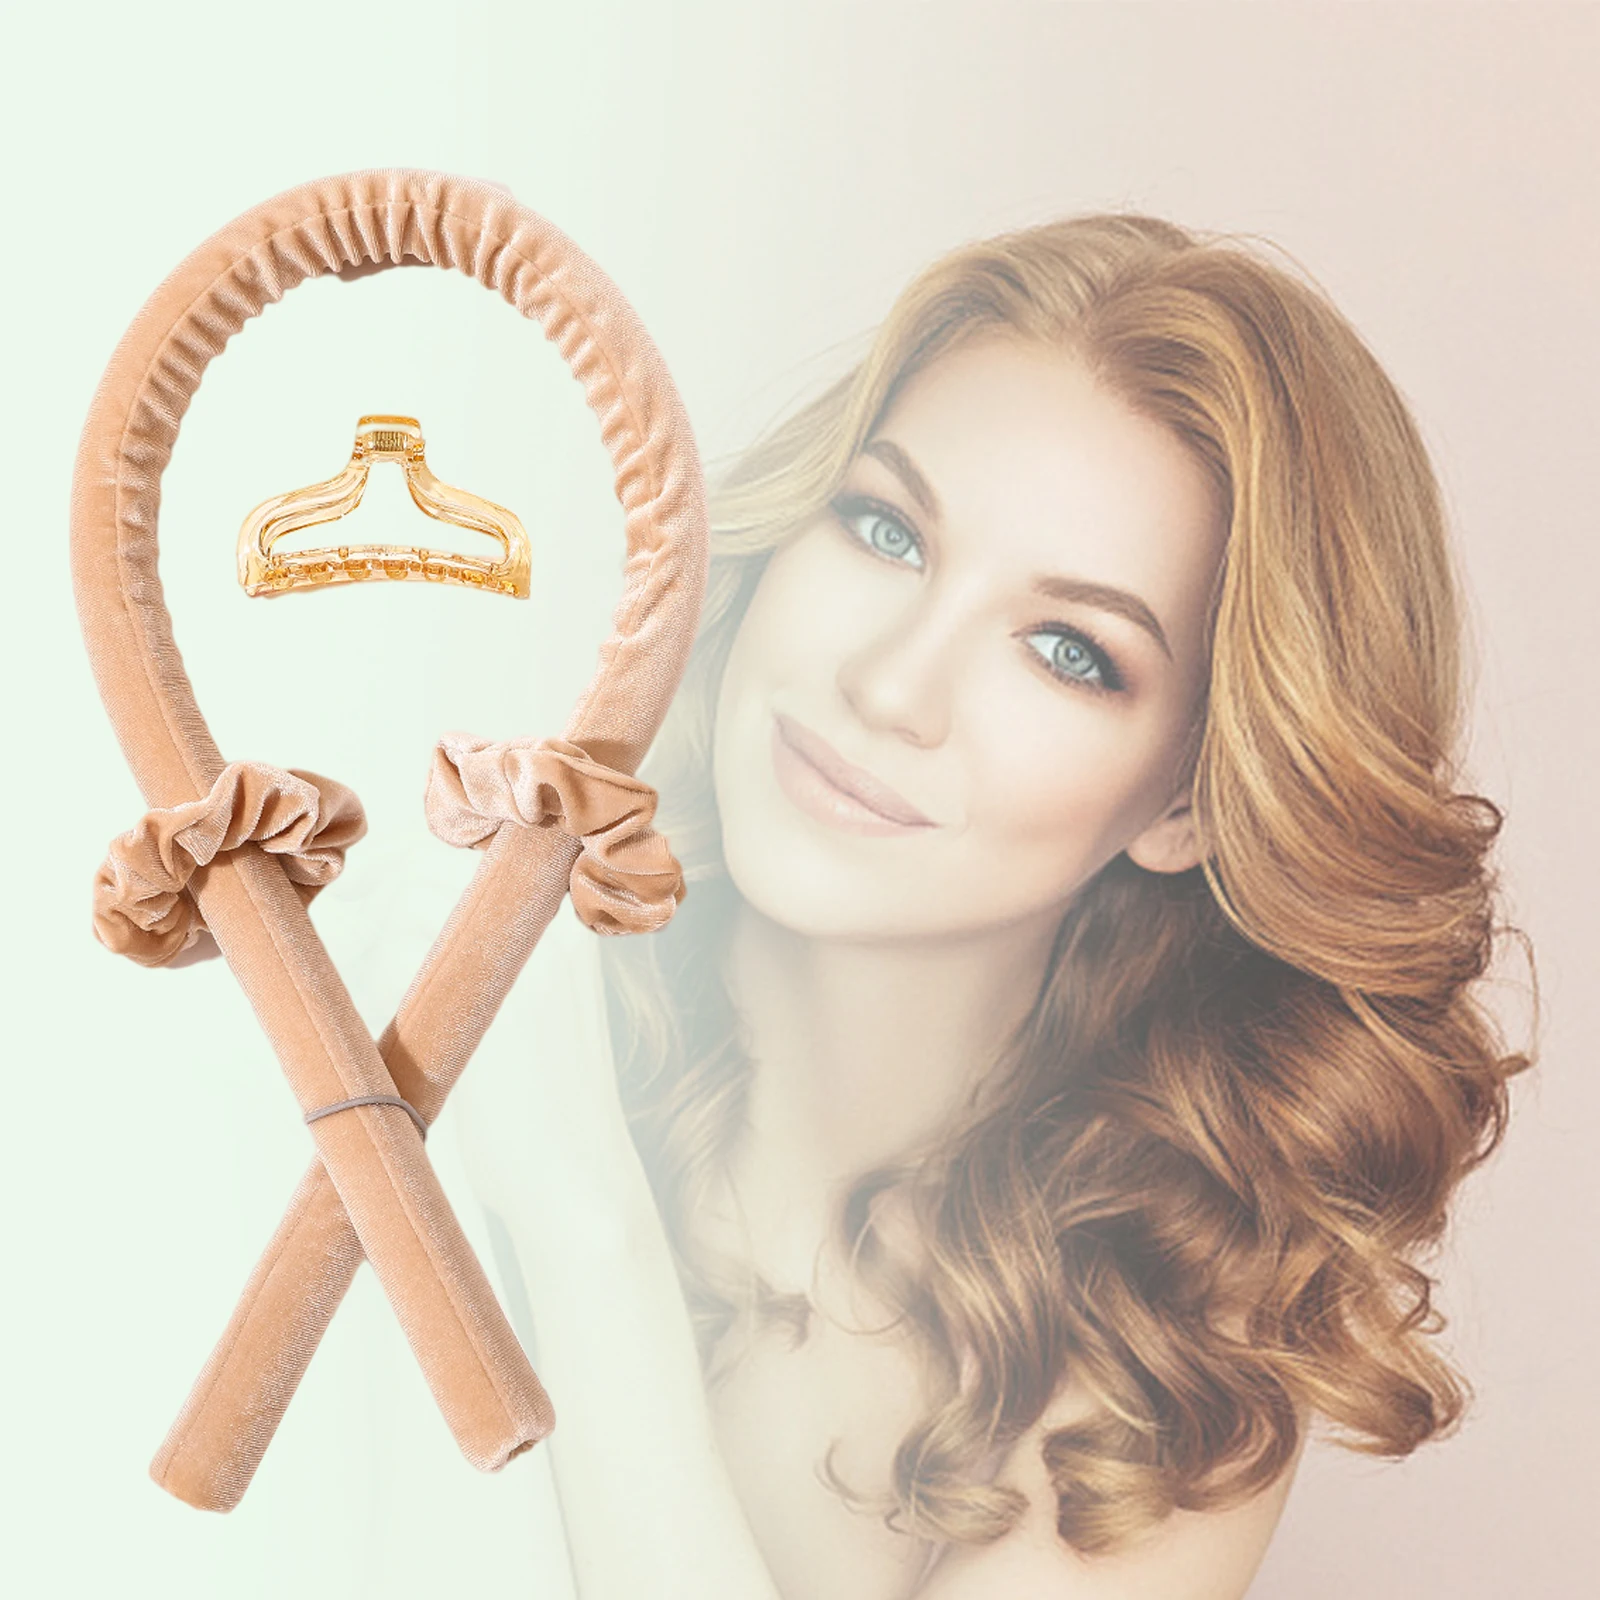 Heatless Hair Curlers No Heat Curling Ribbon Sleep Overnight Soft Foam Hair Rollers Rods Make Hair Curly Soft And Shiny